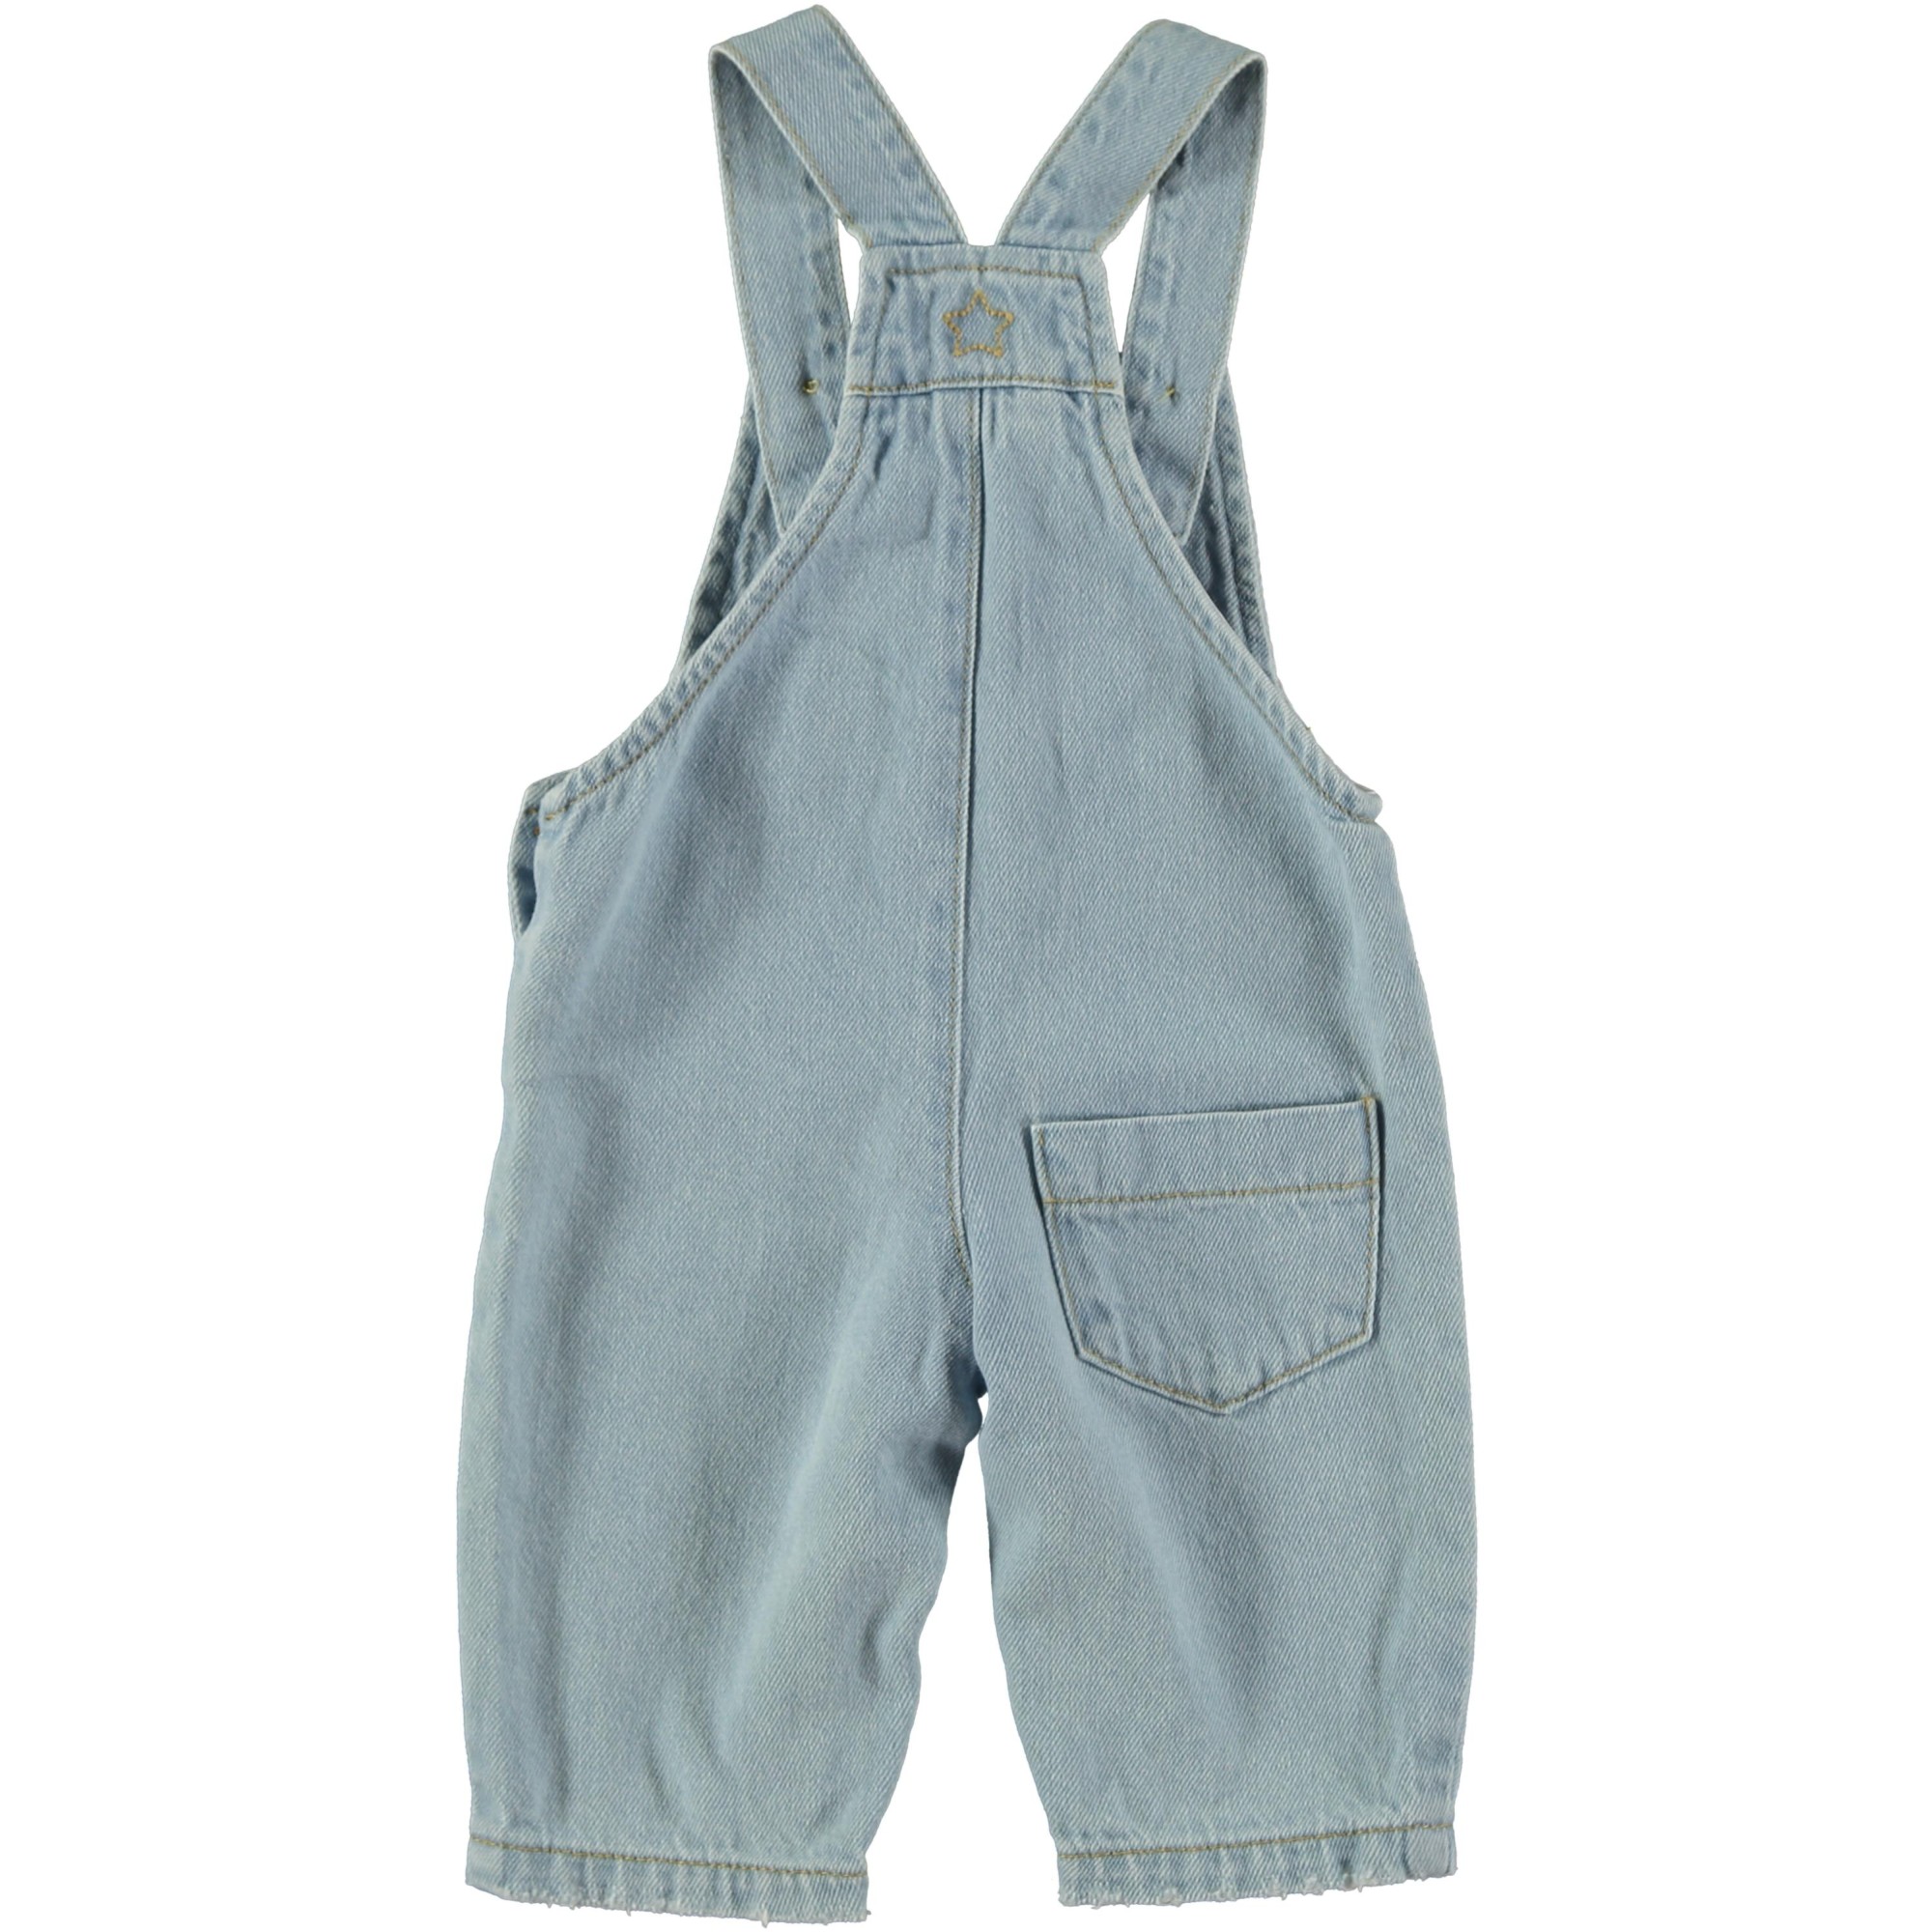 BABY JEANS OVERALL 2